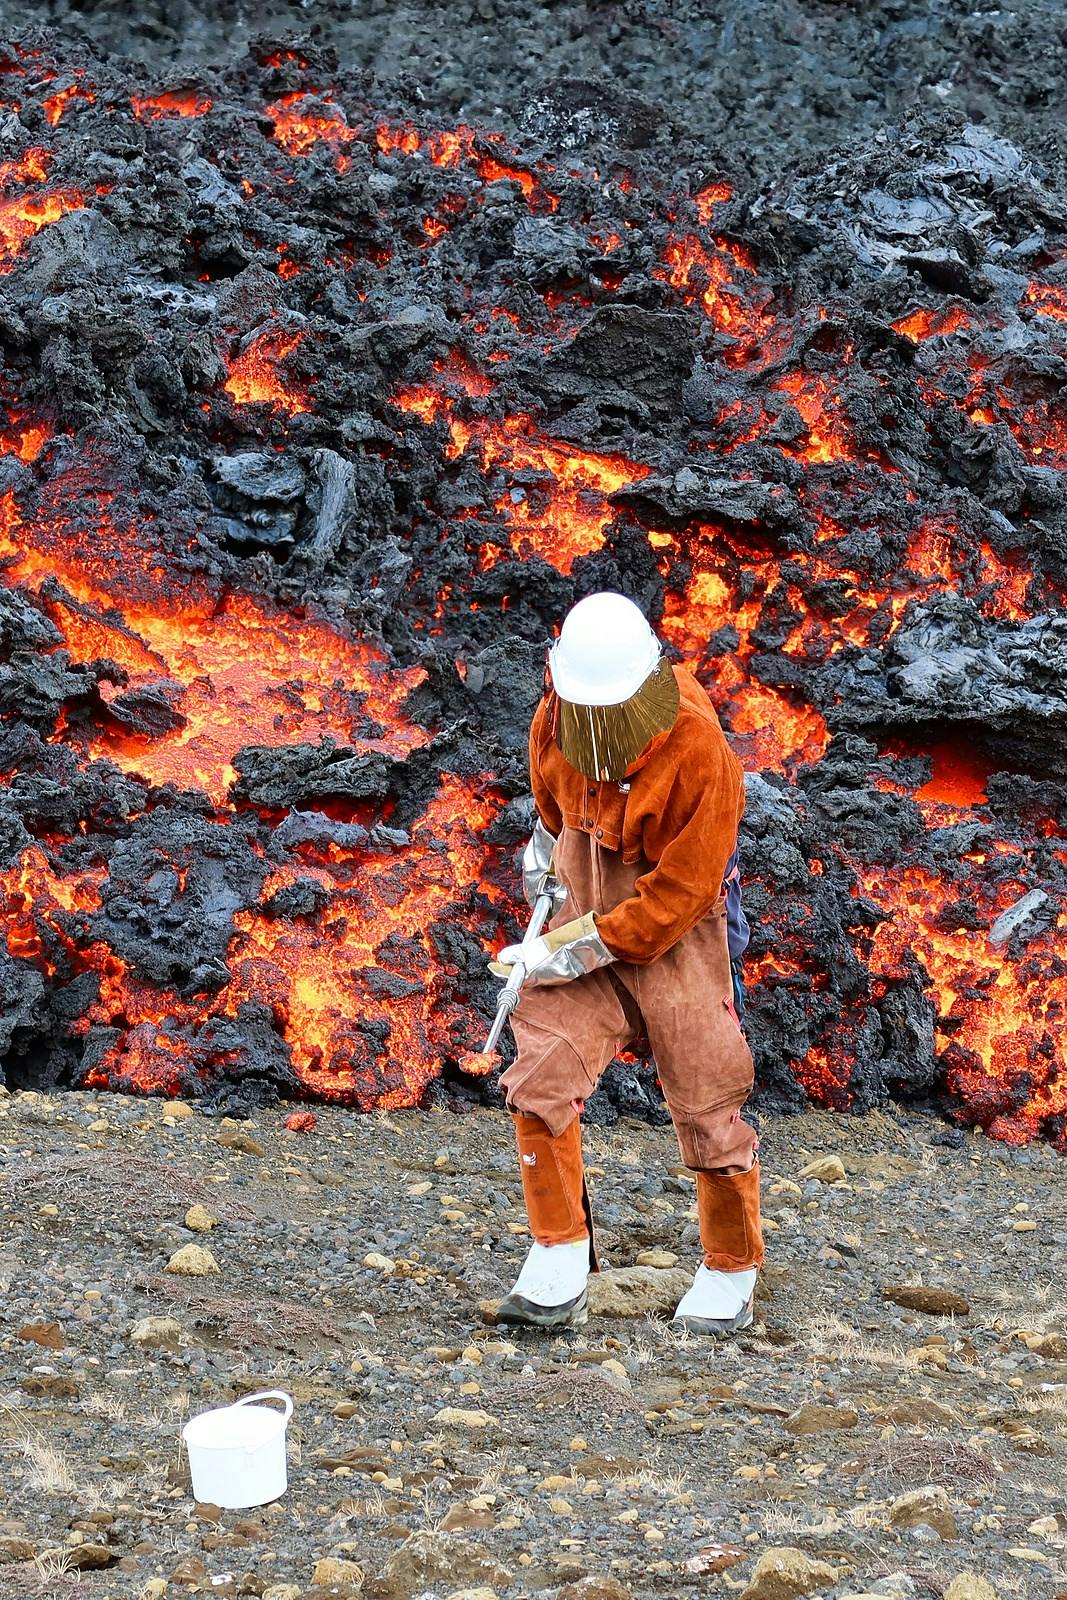 A person in a thermal suit collecting samples from flowing lava